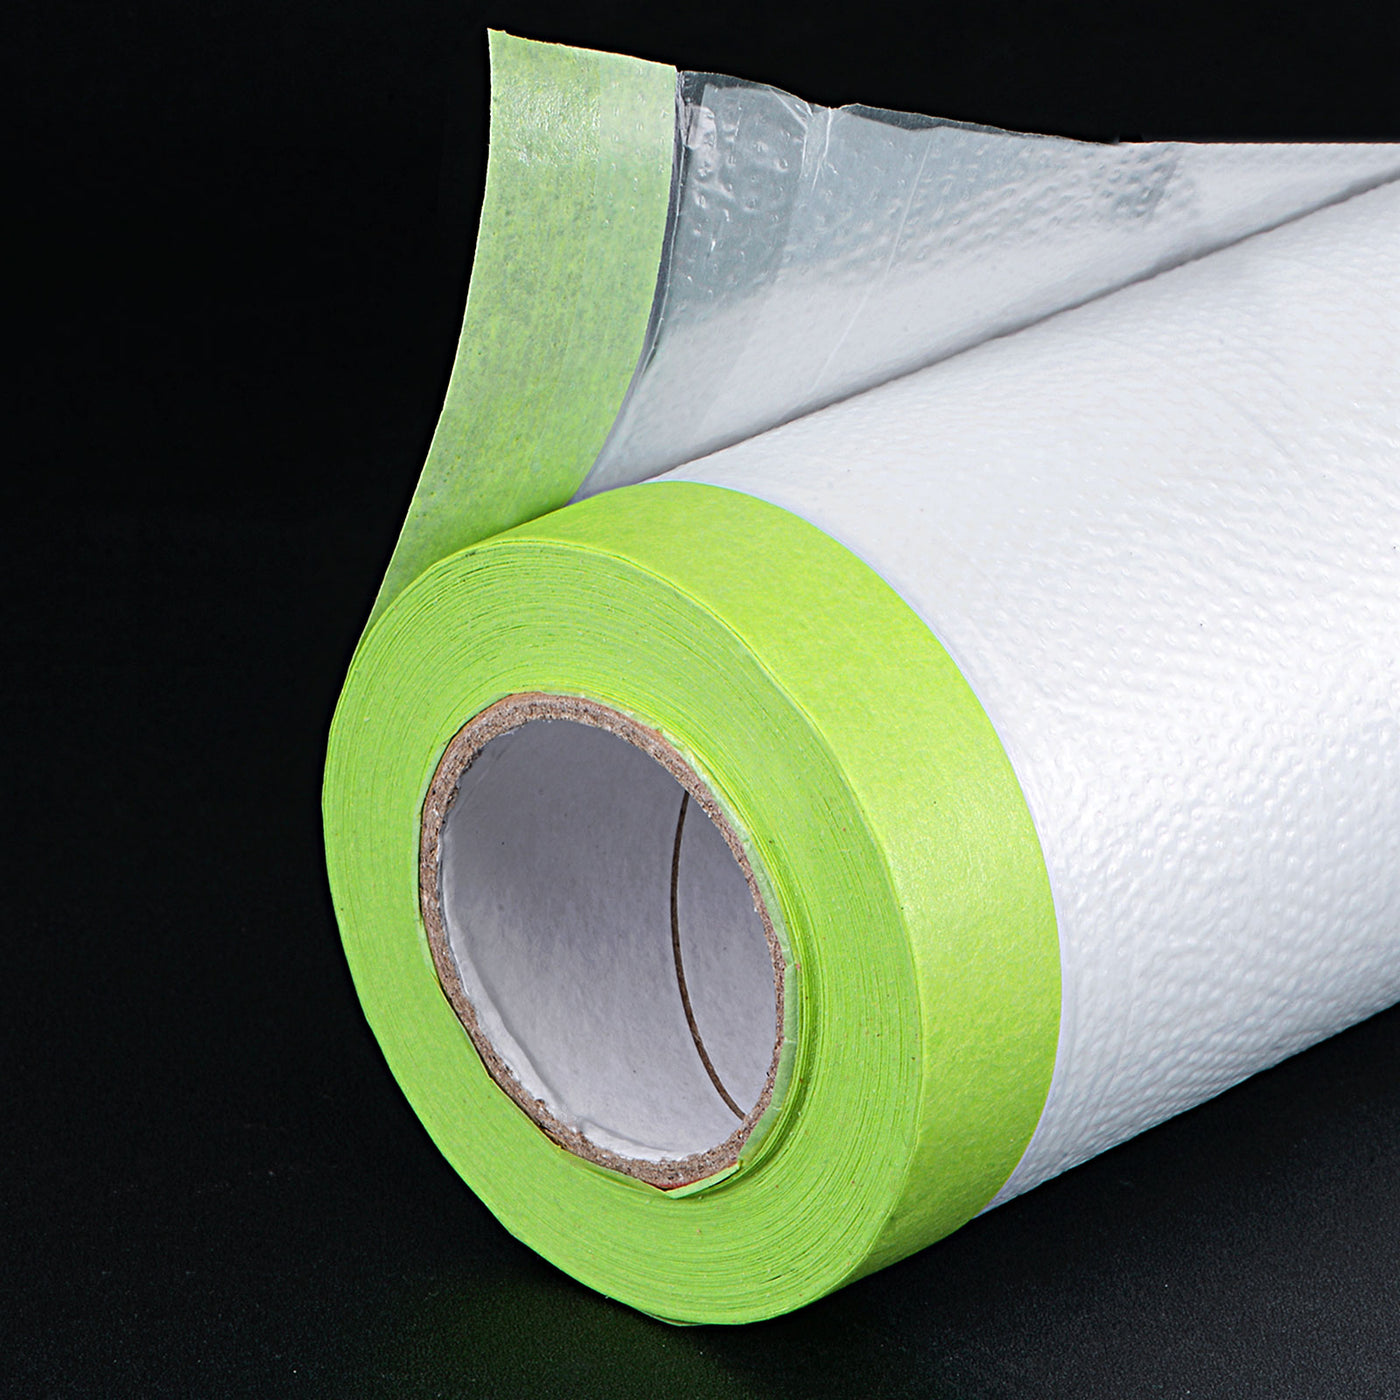 Uxcell Uxcell Pre-Taped Masking Film 118.1" x 49ft with Medium-Tack Painters Tape Green 2Pcs